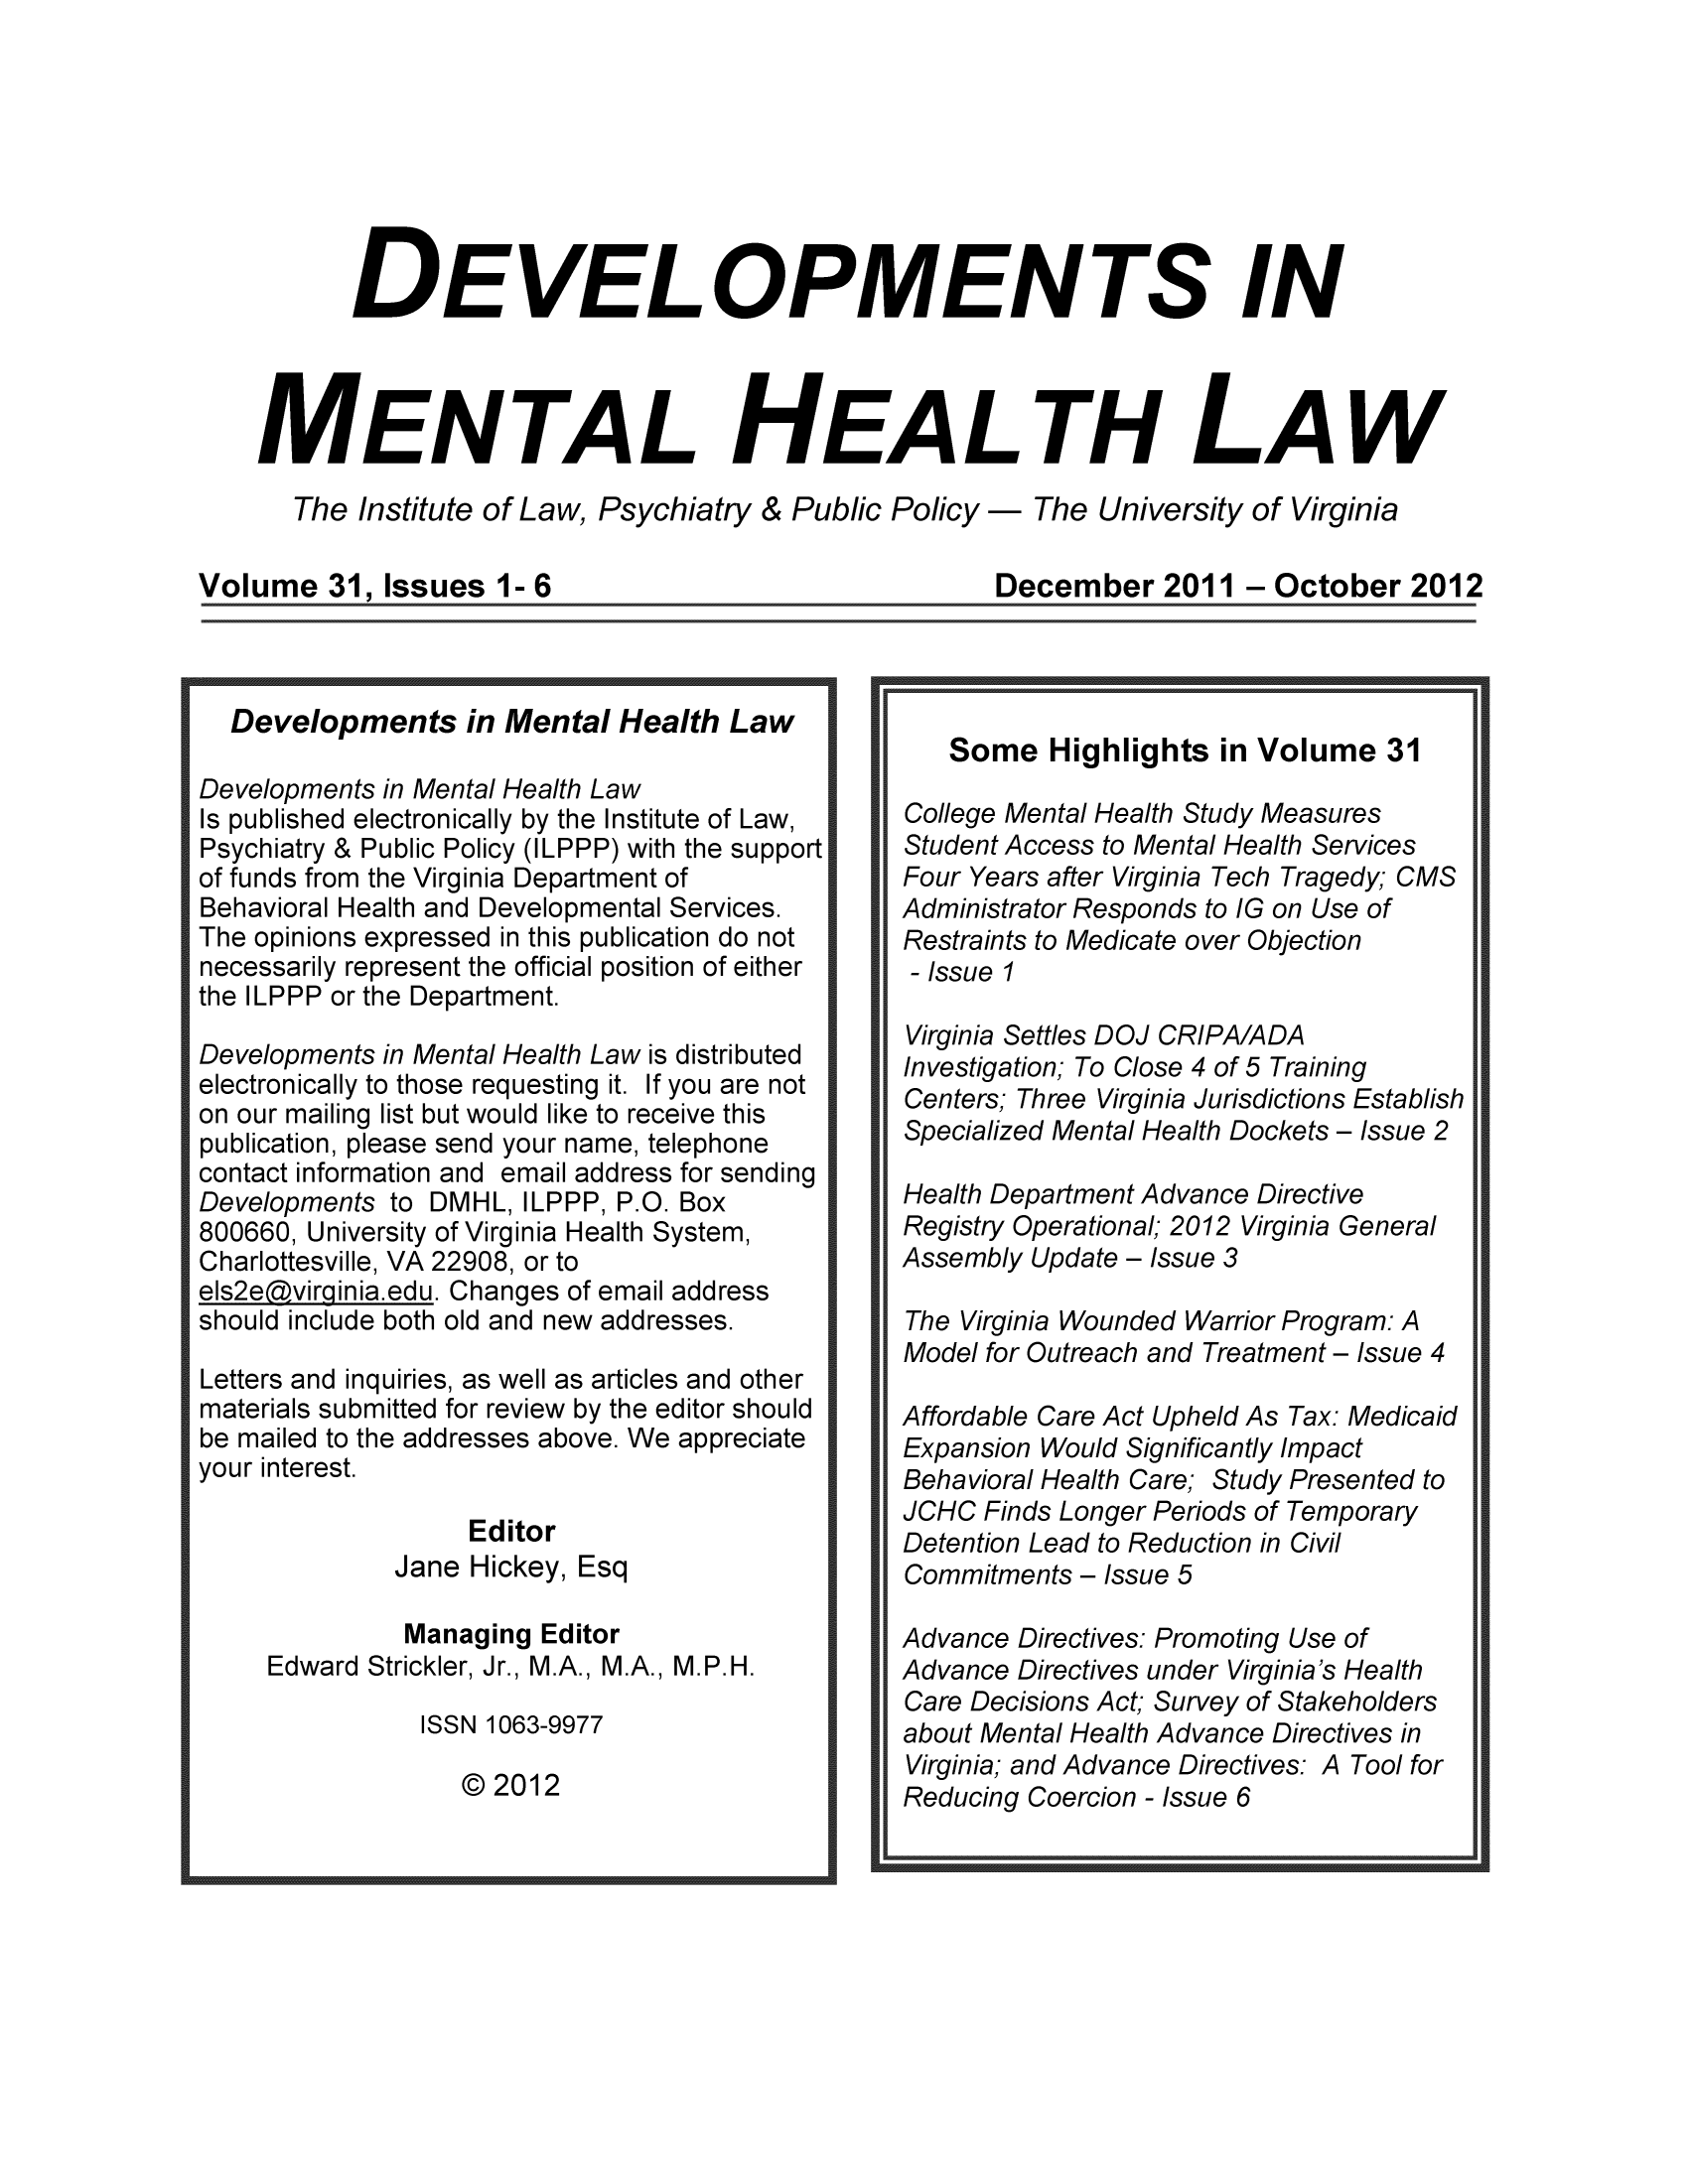 handle is hein.journals/dvmnhlt31 and id is 1 raw text is: DEVELOPMENTS IN
MENTAL HEALTH LAW
The Institute of Law, Psychiatry & Public Policy - The University of Virginia

Volume 31, Issues 1- 6
Developments in Mental Health Law
Developments in Mental Health Law
Is published electronically by the Institute of Law,
Psychiatry & Public Policy (ILPPP) with the support
of funds from the Virginia Department of
Behavioral Health and Developmental Services.
The opinions expressed in this publication do not
necessarily represent the official position of either
the ILPPP or the Department.
Developments in Mental Health Law is distributed
electronically to those requesting it. If you are not
on our mailing list but would like to receive this
publication, please send your name, telephone
contact information and email address for sending
Developments to DMHL, ILPPP, P.O. Box
800660, University of Virginia Health System,
Charlottesville, VA 22908, or to
els2edvirginia.edu. Changes of email address
should include both old and new addresses.
Letters and inquiries, as well as articles and other
materials submitted for review by the editor should
be mailed to the addresses above. We appreciate
your interest.
Editor
Jane Hickey, Esq
Managing Editor
Edward Strickler, Jr., M.A., M.A., M.P.H.
ISSN 1063-9977

© 2012

December 2011 - October 2012
Some Highlights in Volume 31
College Mental Health Study Measures
Student Access to Mental Health Services
Four Years after Virginia Tech Tragedy; CMS
Administrator Responds to IG on Use of
Restraints to Medicate over Objection
- Issue I
Virginia Settles DOJ CRIPA/ADA
Investigation; To Close 4 of 5 Training
Centers; Three Virginia Jurisdictions Establish
Specialized Mental Health Dockets - Issue 2
Health Department Advance Directive
Registry Operational; 2012 Virginia General
Assembly Update - Issue 3
The Virginia Wounded Warrior Program: A
Model for Outreach and Treatment - Issue 4
Affordable Care Act Upheld As Tax: Medicaid
Expansion Would Significantly Impact
Behavioral Health Care; Study Presented to
JCHC Finds Longer Periods of Temporary
Detention Lead to Reduction in Civil
Commitments - Issue 5
Advance Directives: Promoting Use of
Advance Directives under Virginia's Health
Care Decisions Act; Survey of Stakeholders
about Mental Health Advance Directives in
Virginia; and Advance Directives: A Tool for
Reducing Coercion - Issue 6


